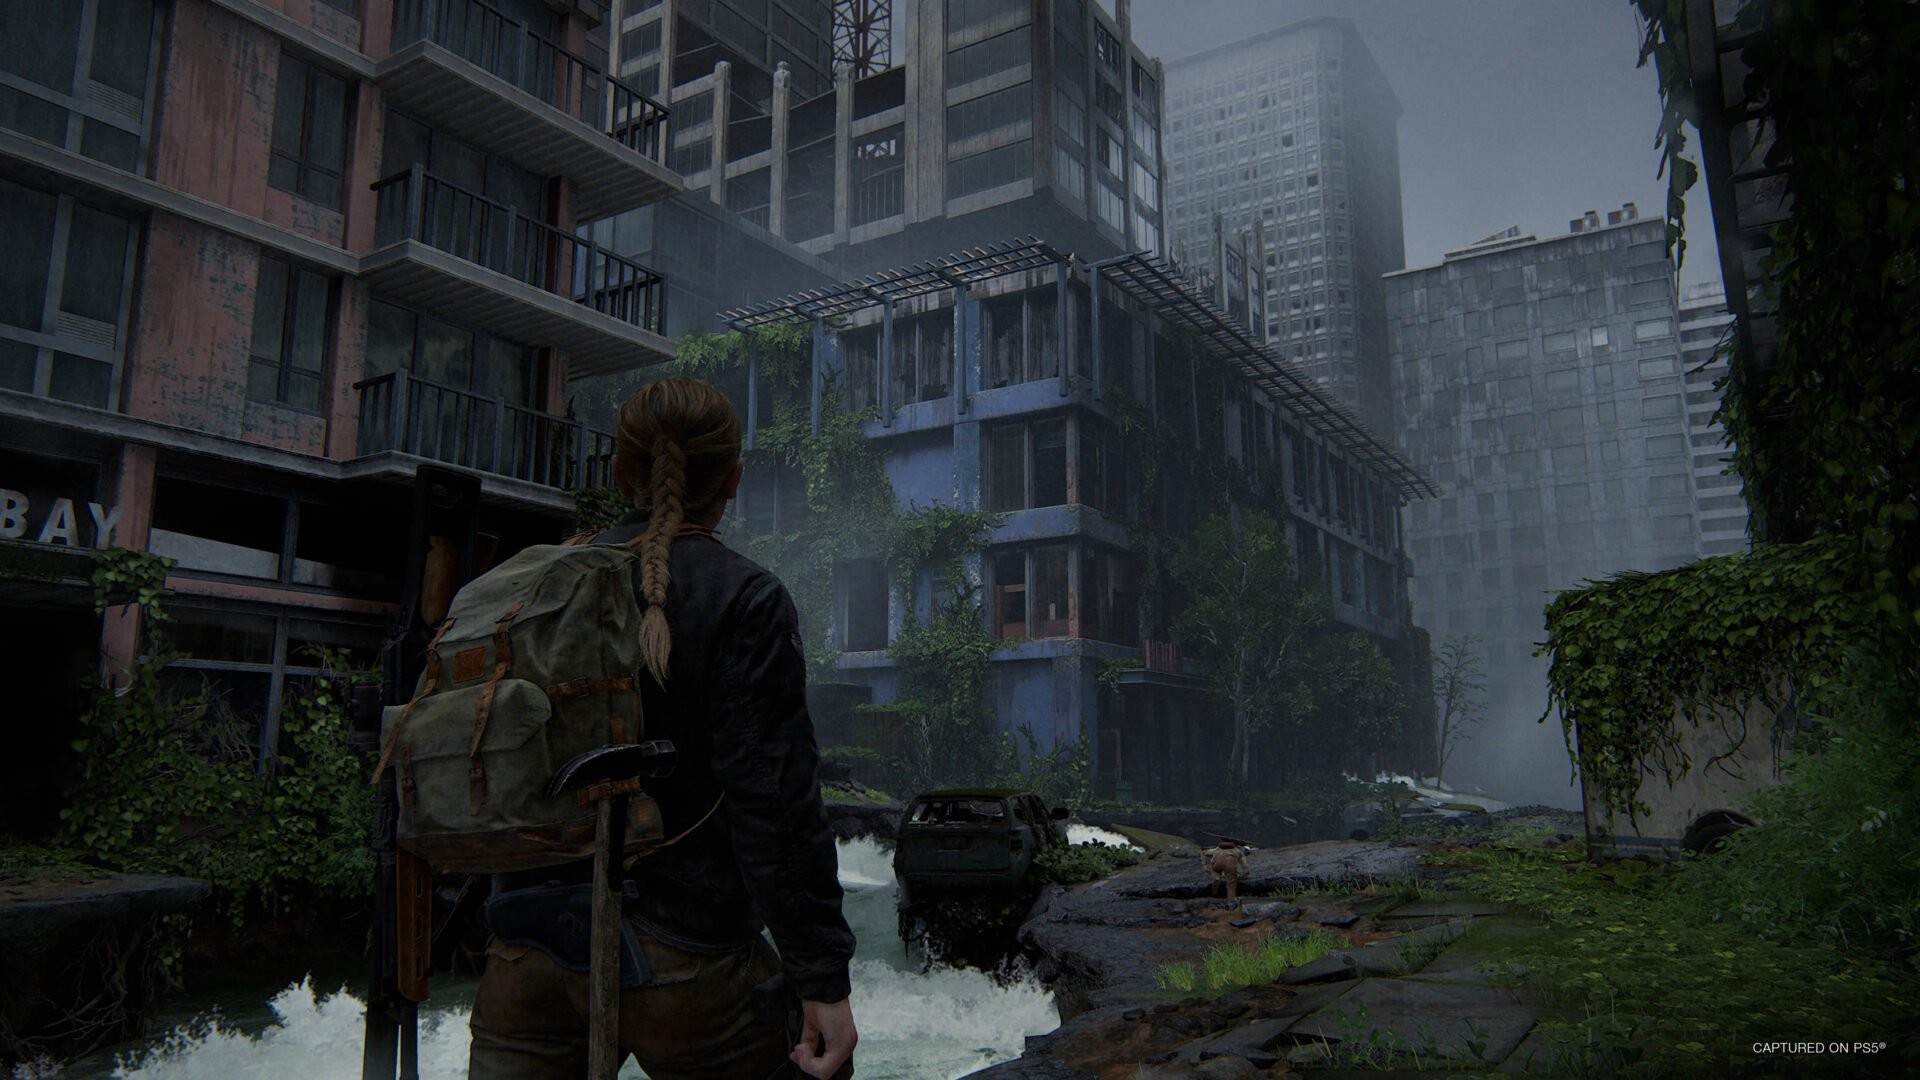 It's officialThe Last Of Us Part II Remaster pre-order will be